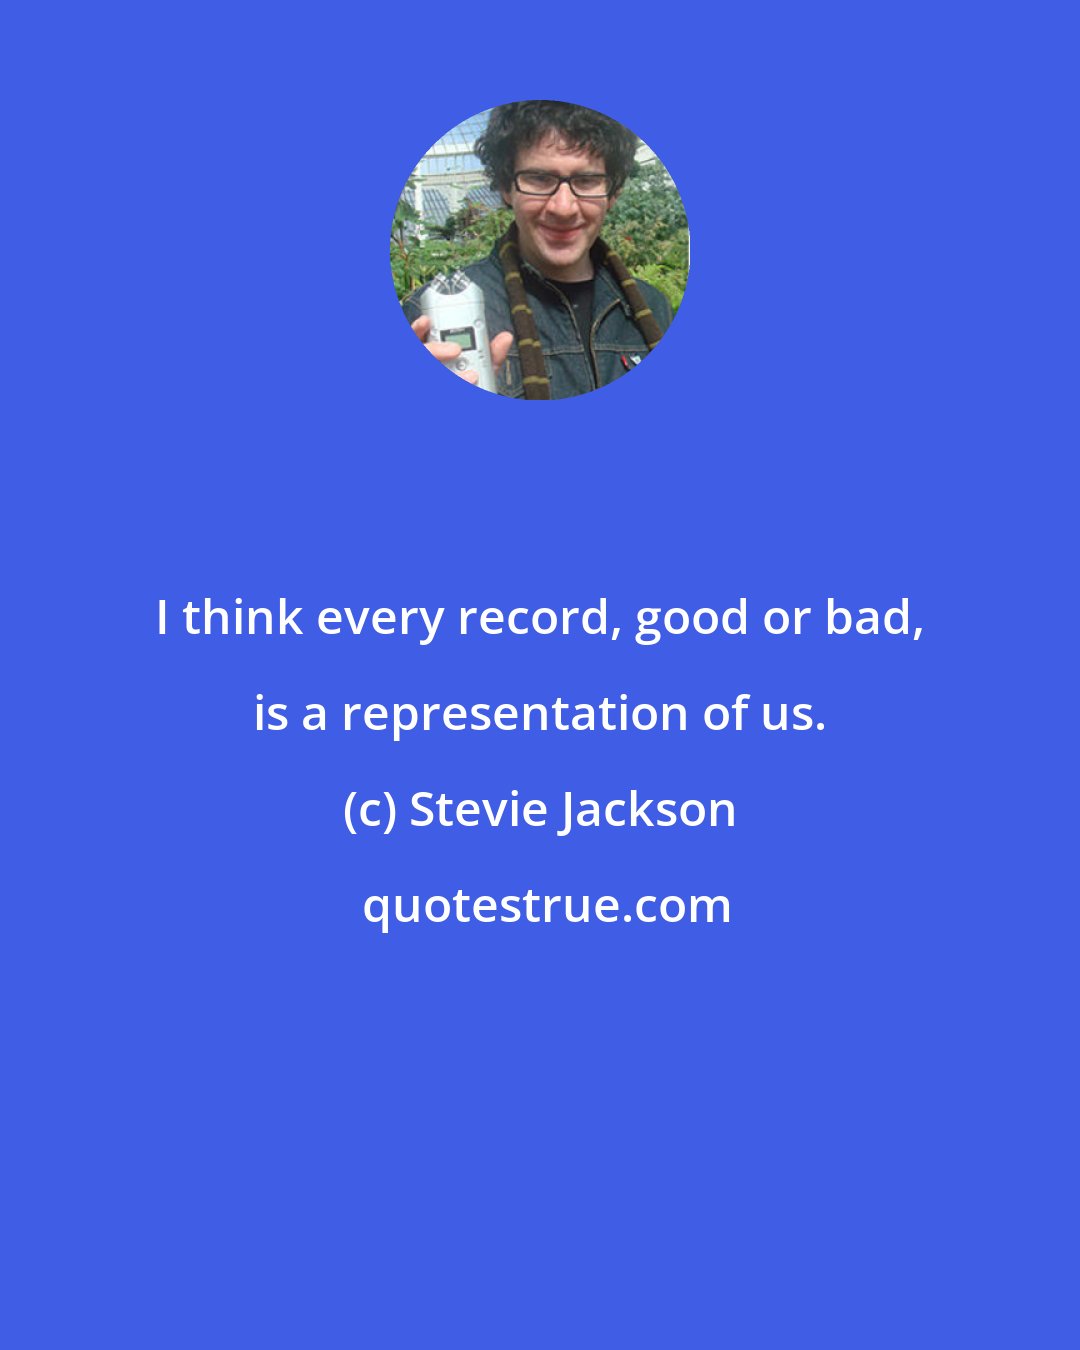 Stevie Jackson: I think every record, good or bad, is a representation of us.